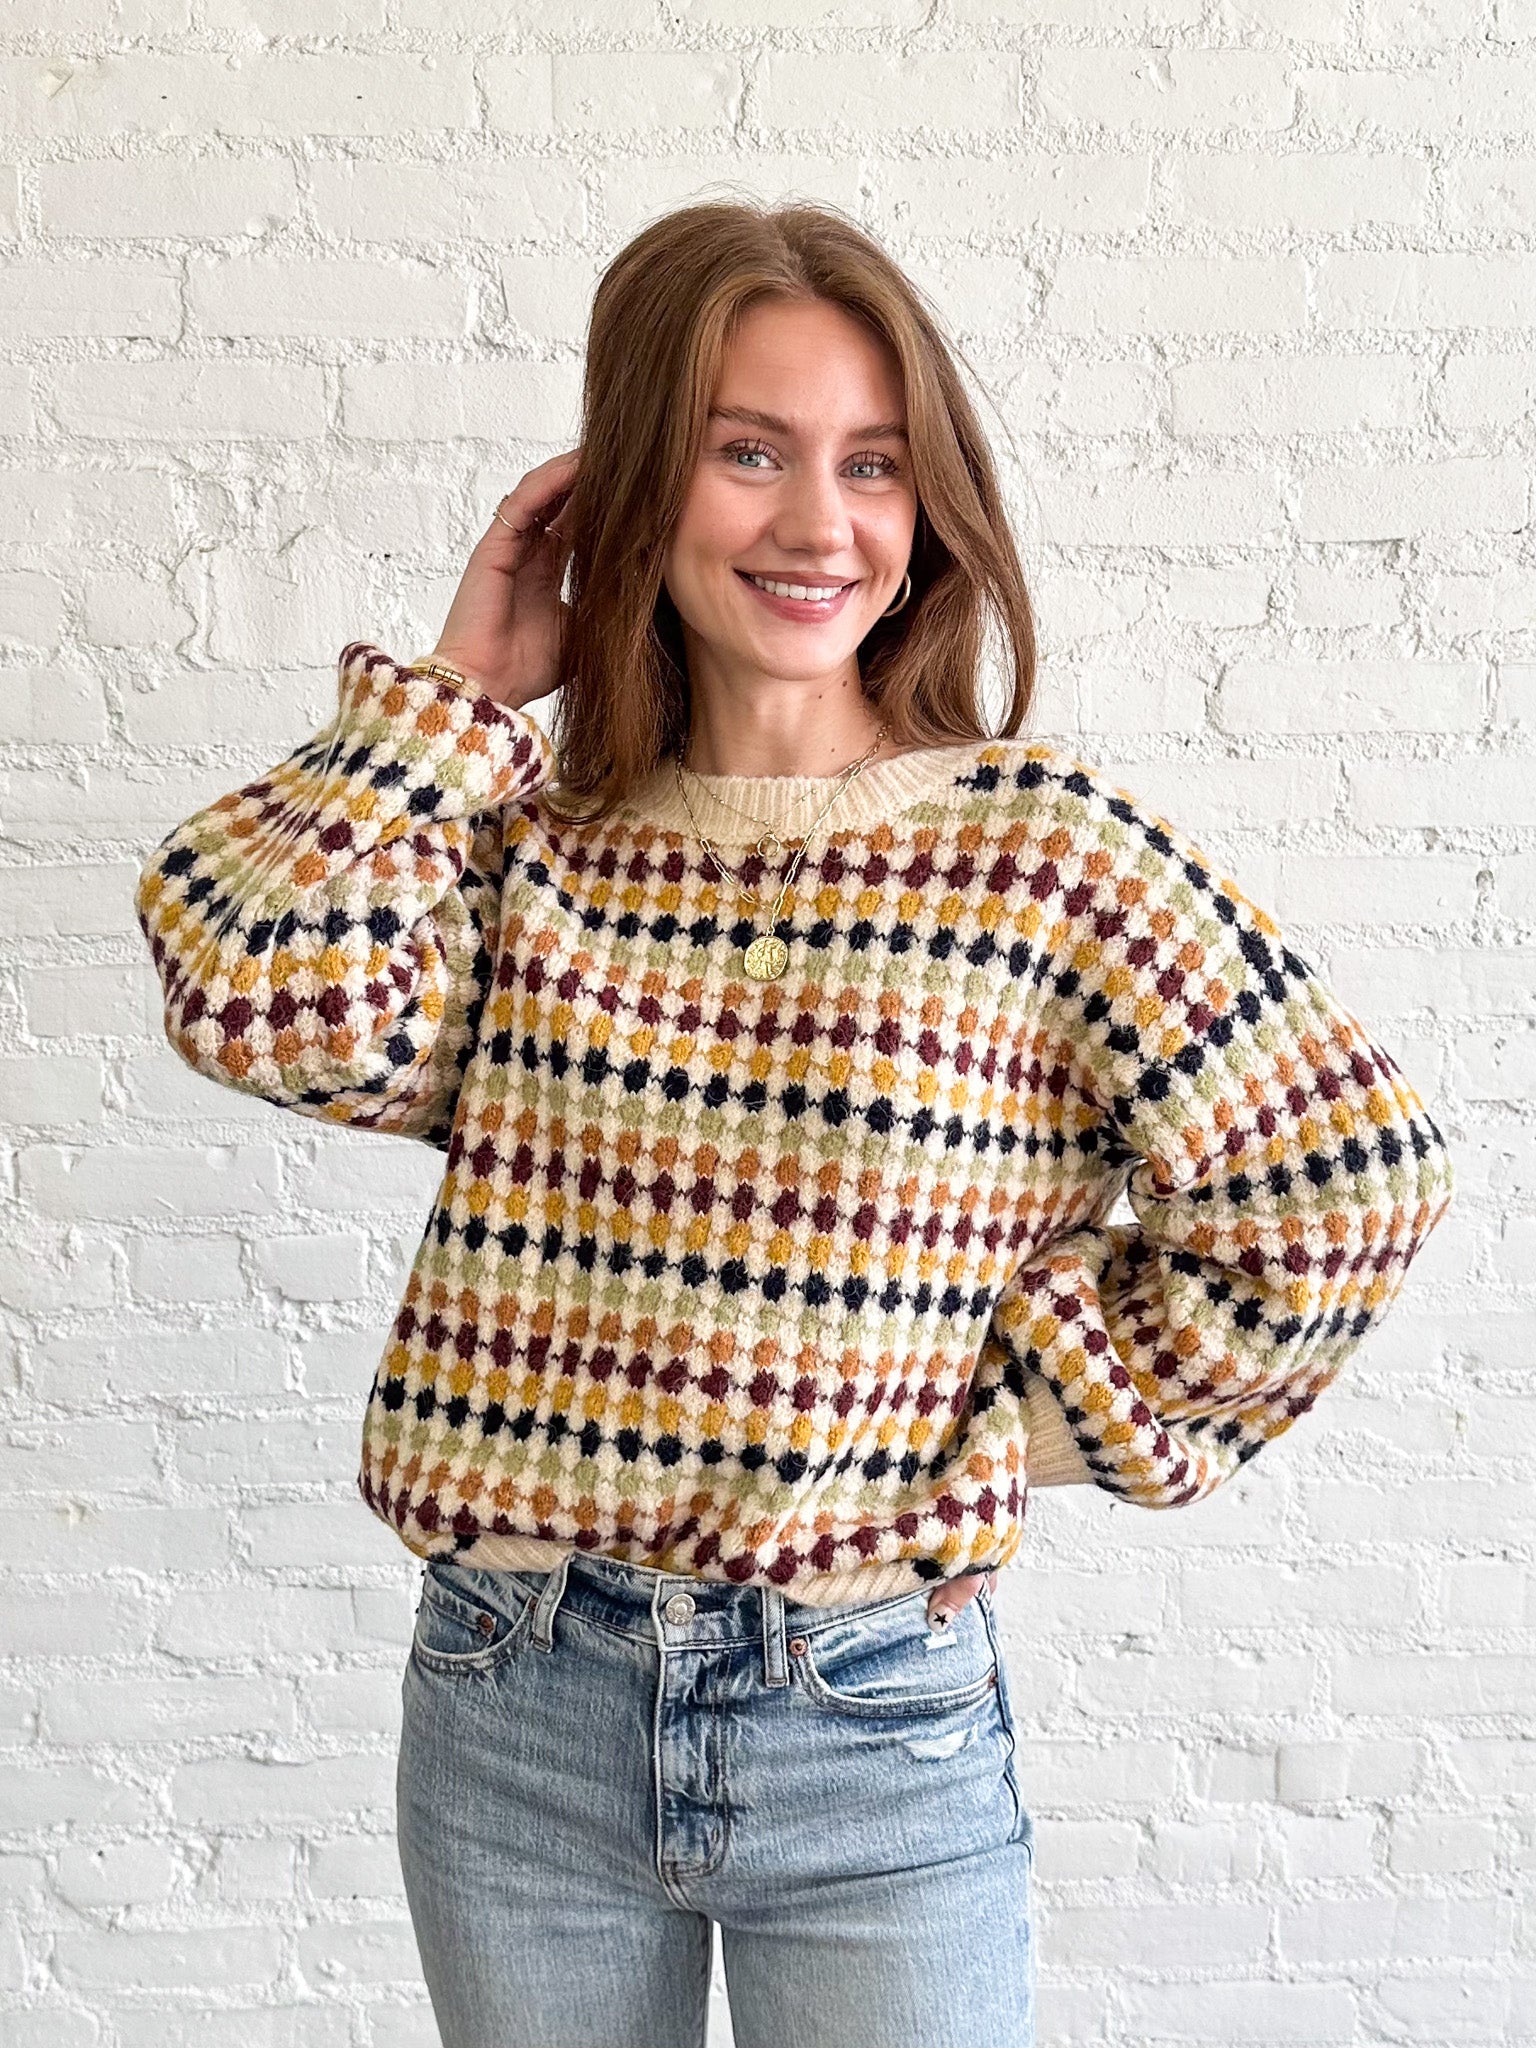 Looking At The Brilliant Sun Sweater